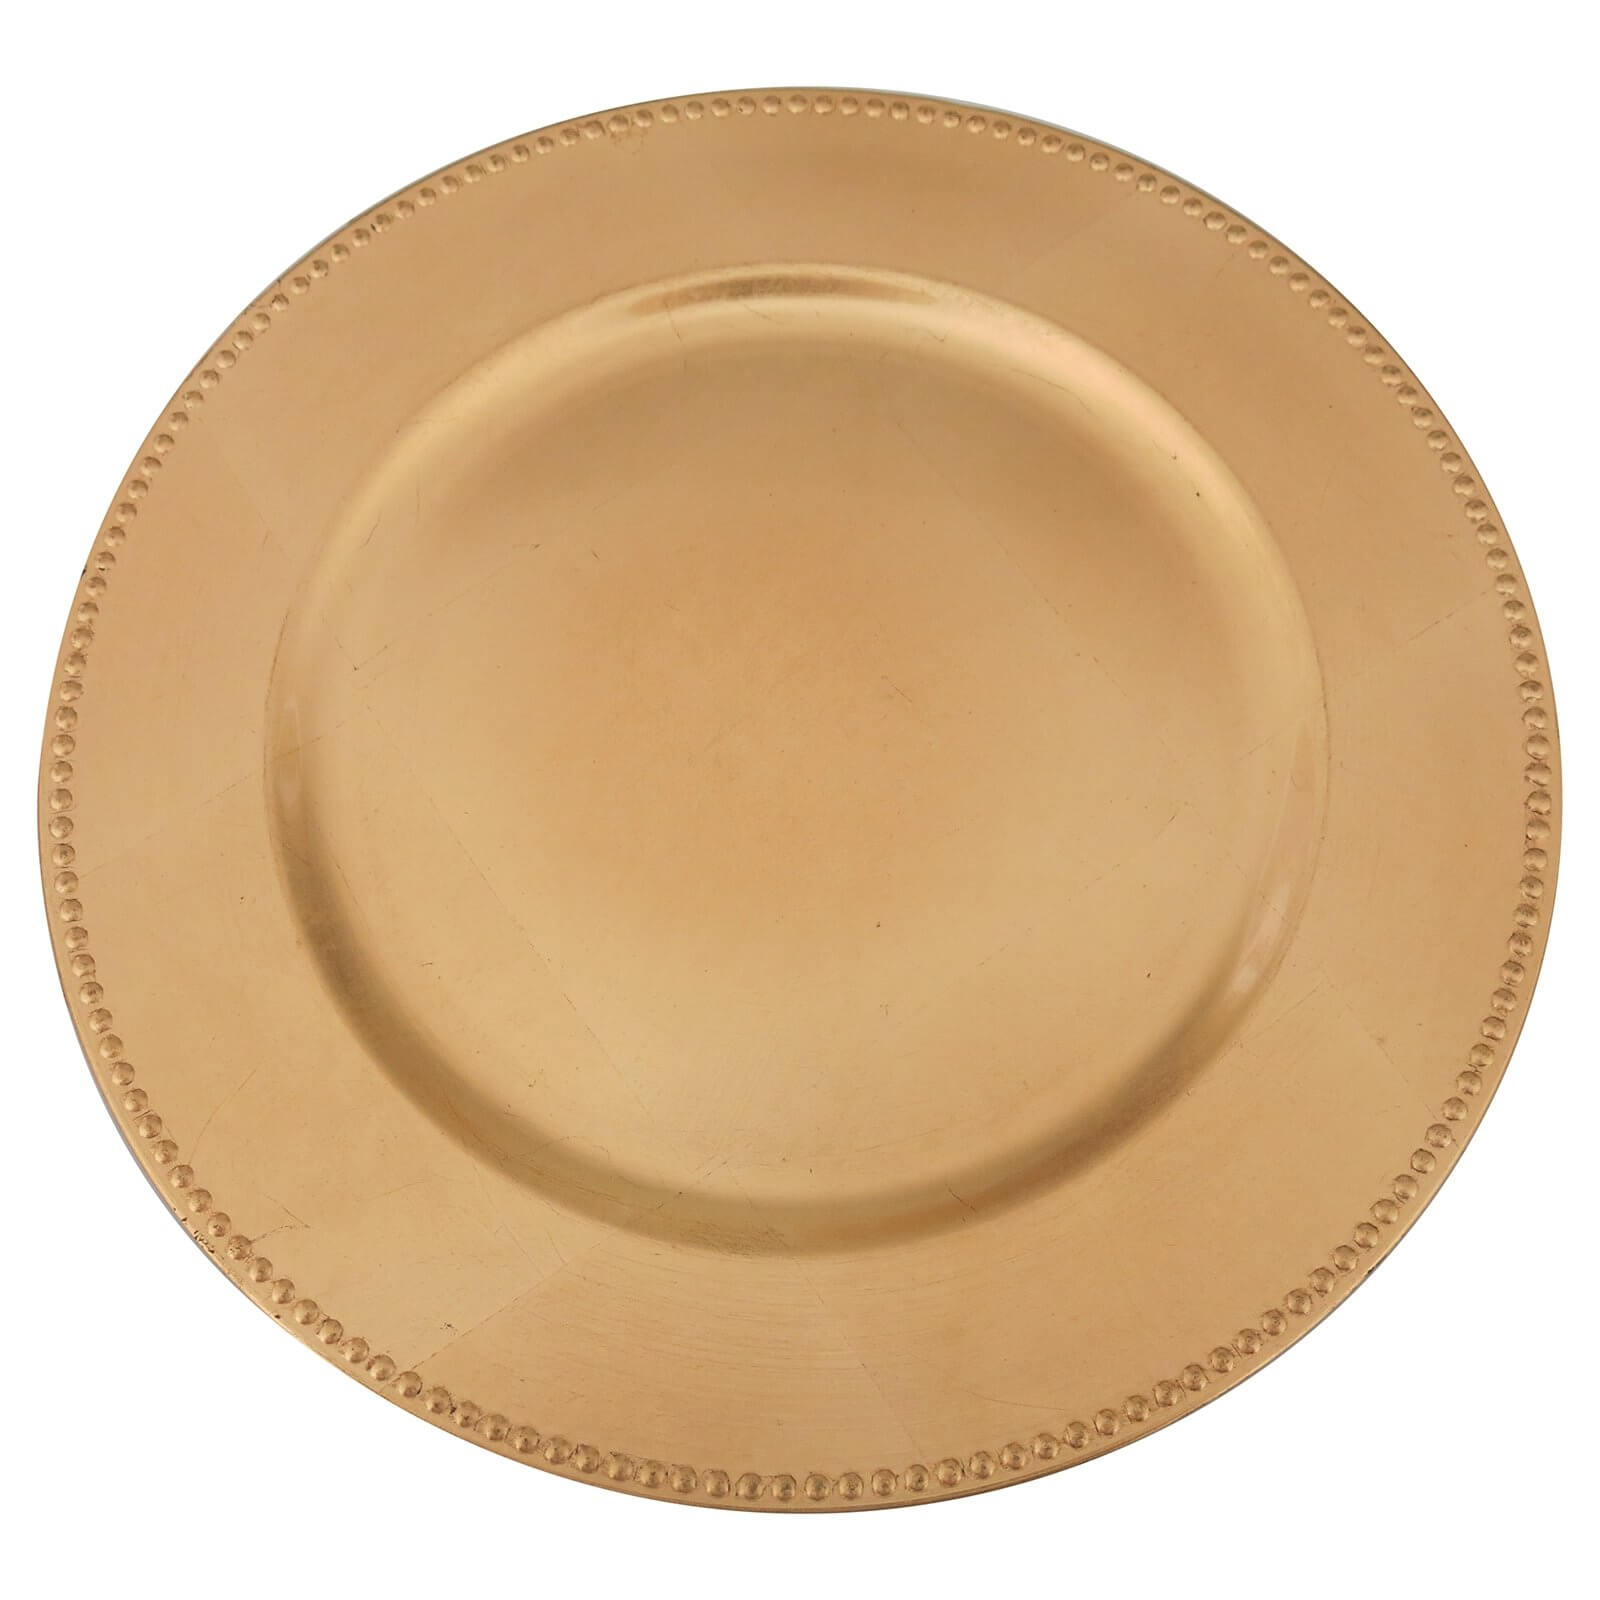 Photo of Charger Plate - Gold